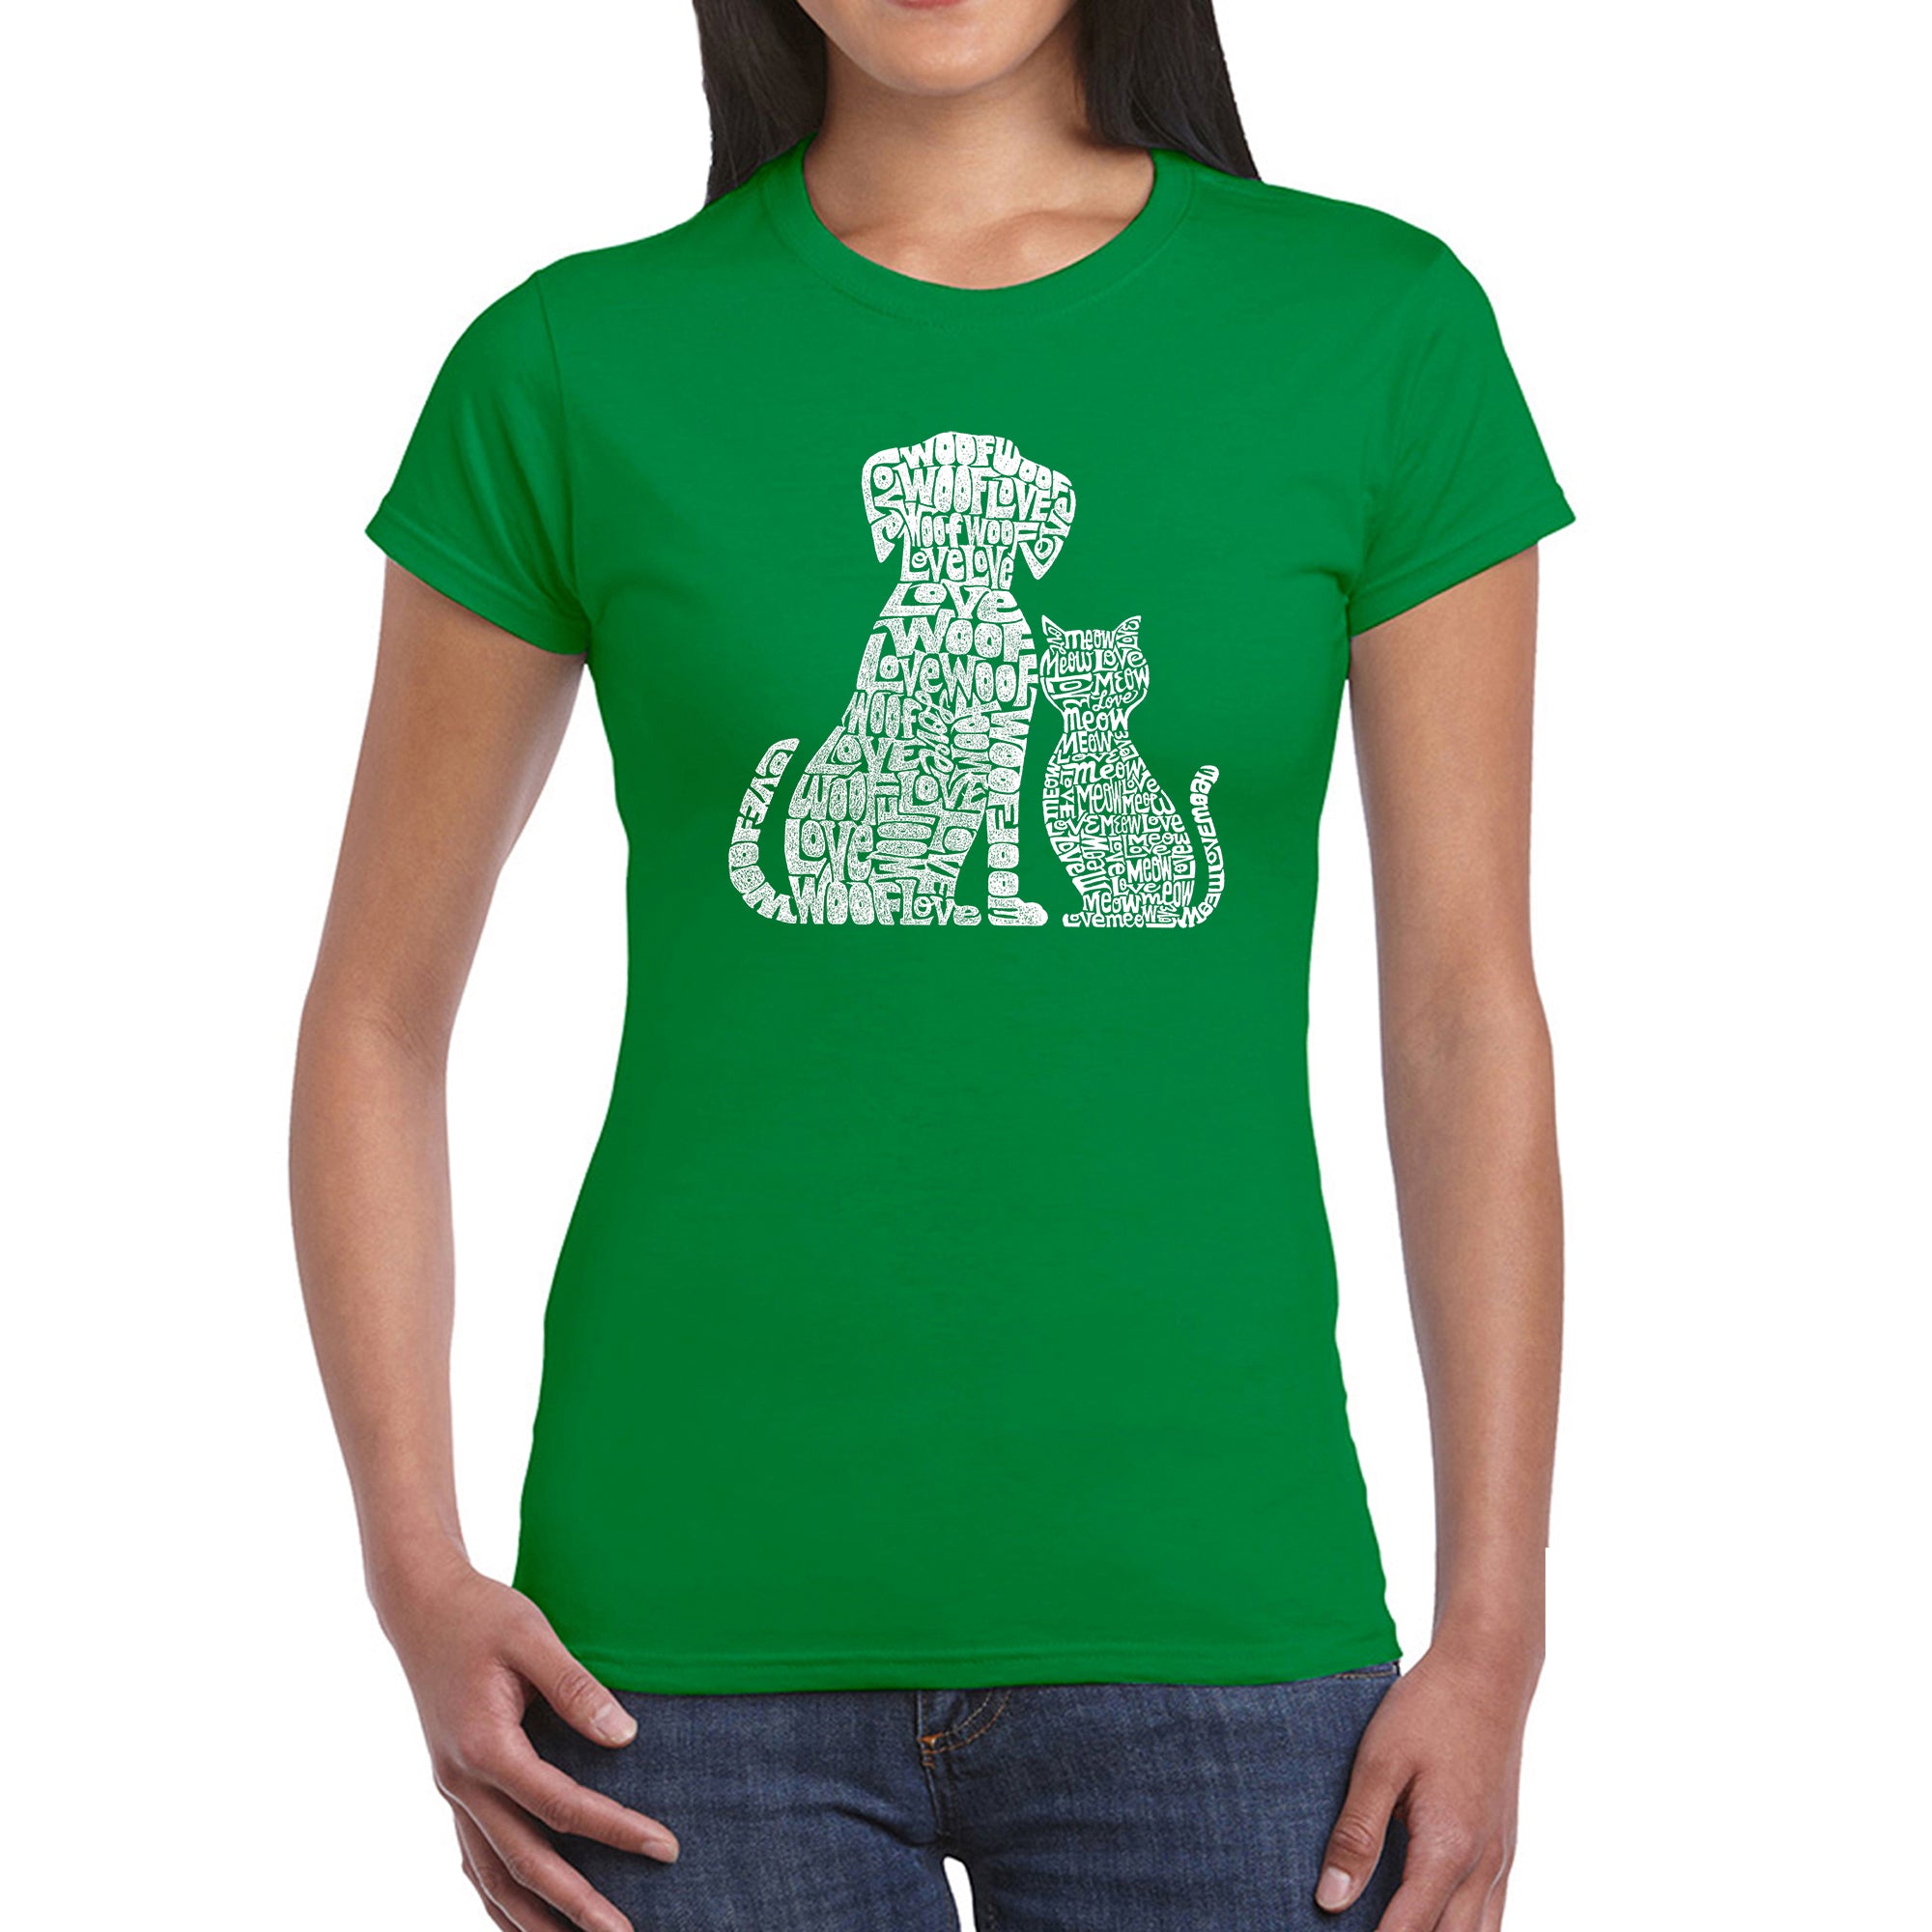 Dogs And Cats - Women's Word Art T-Shirt - Kelly - Large